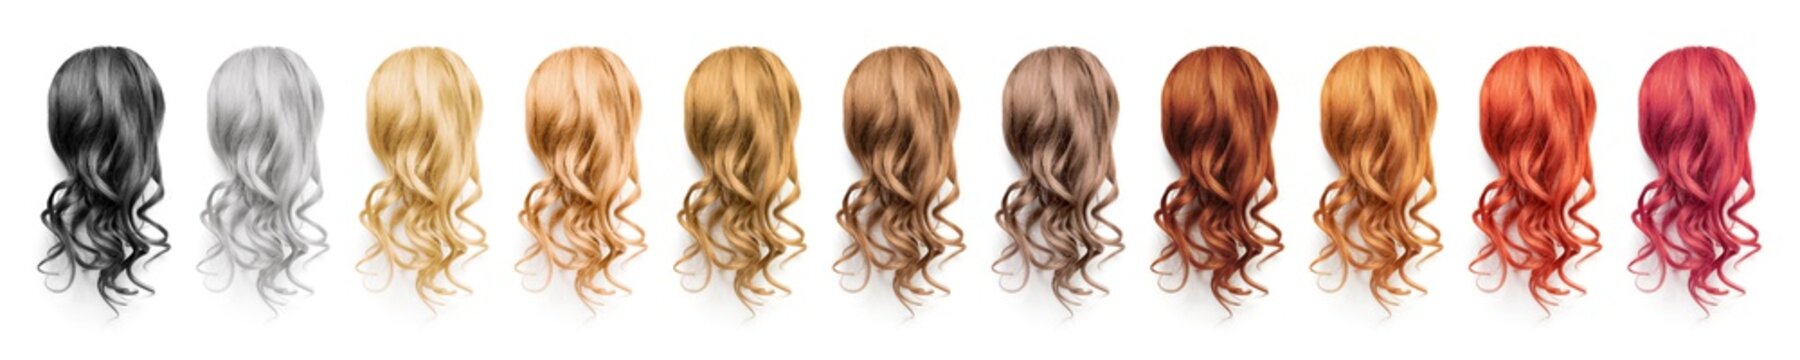 Collection various colors of wavy hair on white background